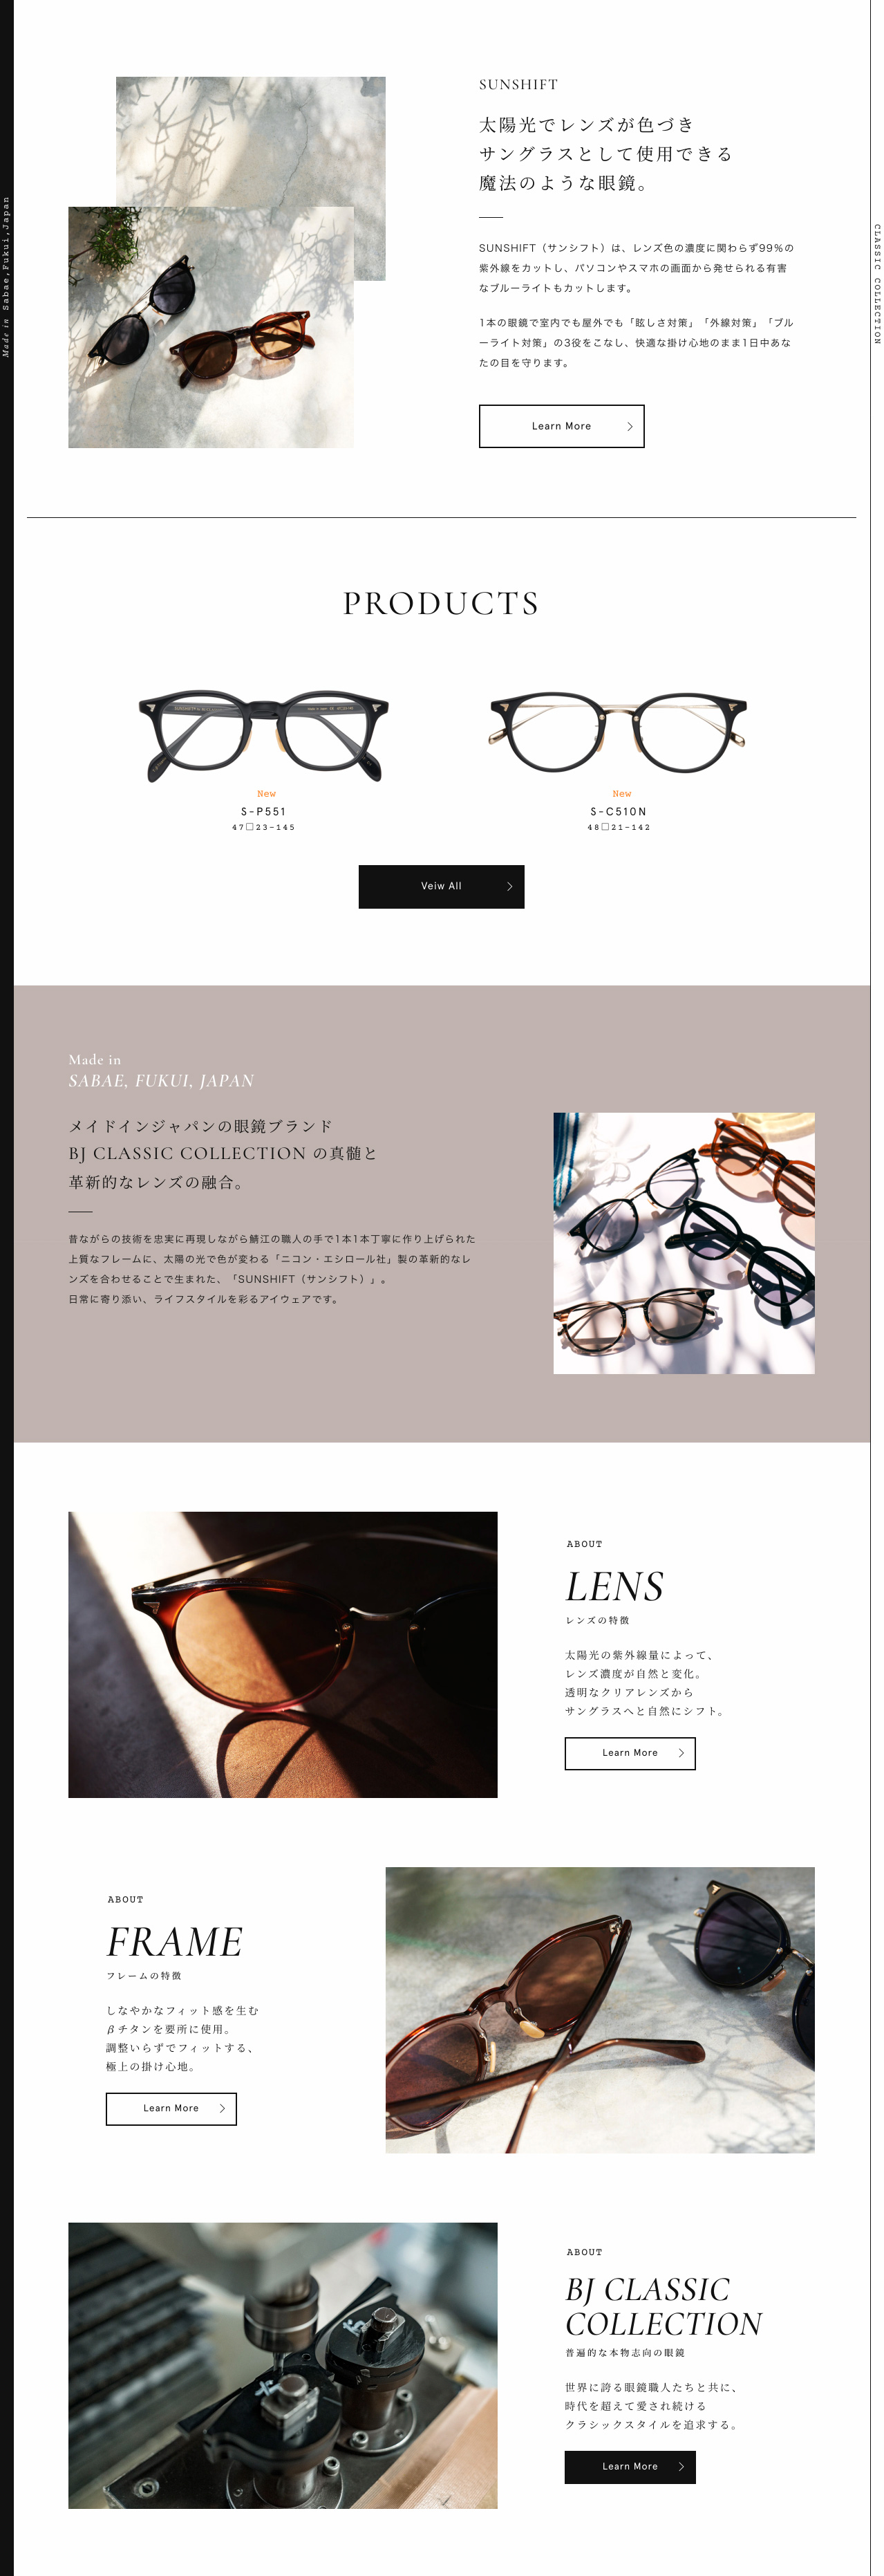 SUNSHIFT by BJ CLASSIC COLLECTION - WORKS | 暮らしとデザイン by